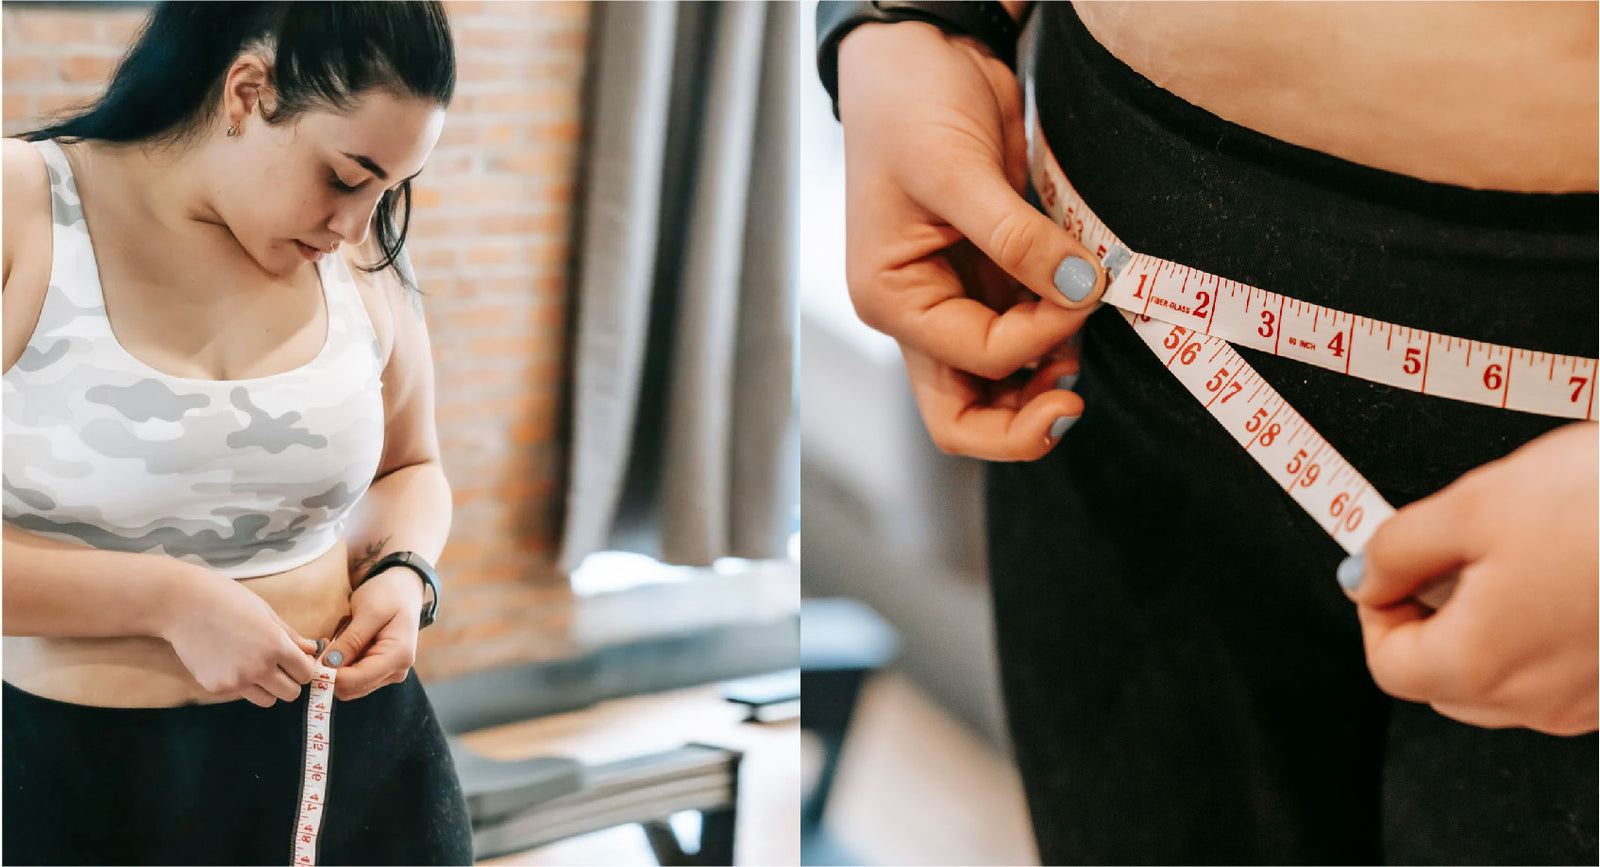 How to take measurements for buying a shapewear